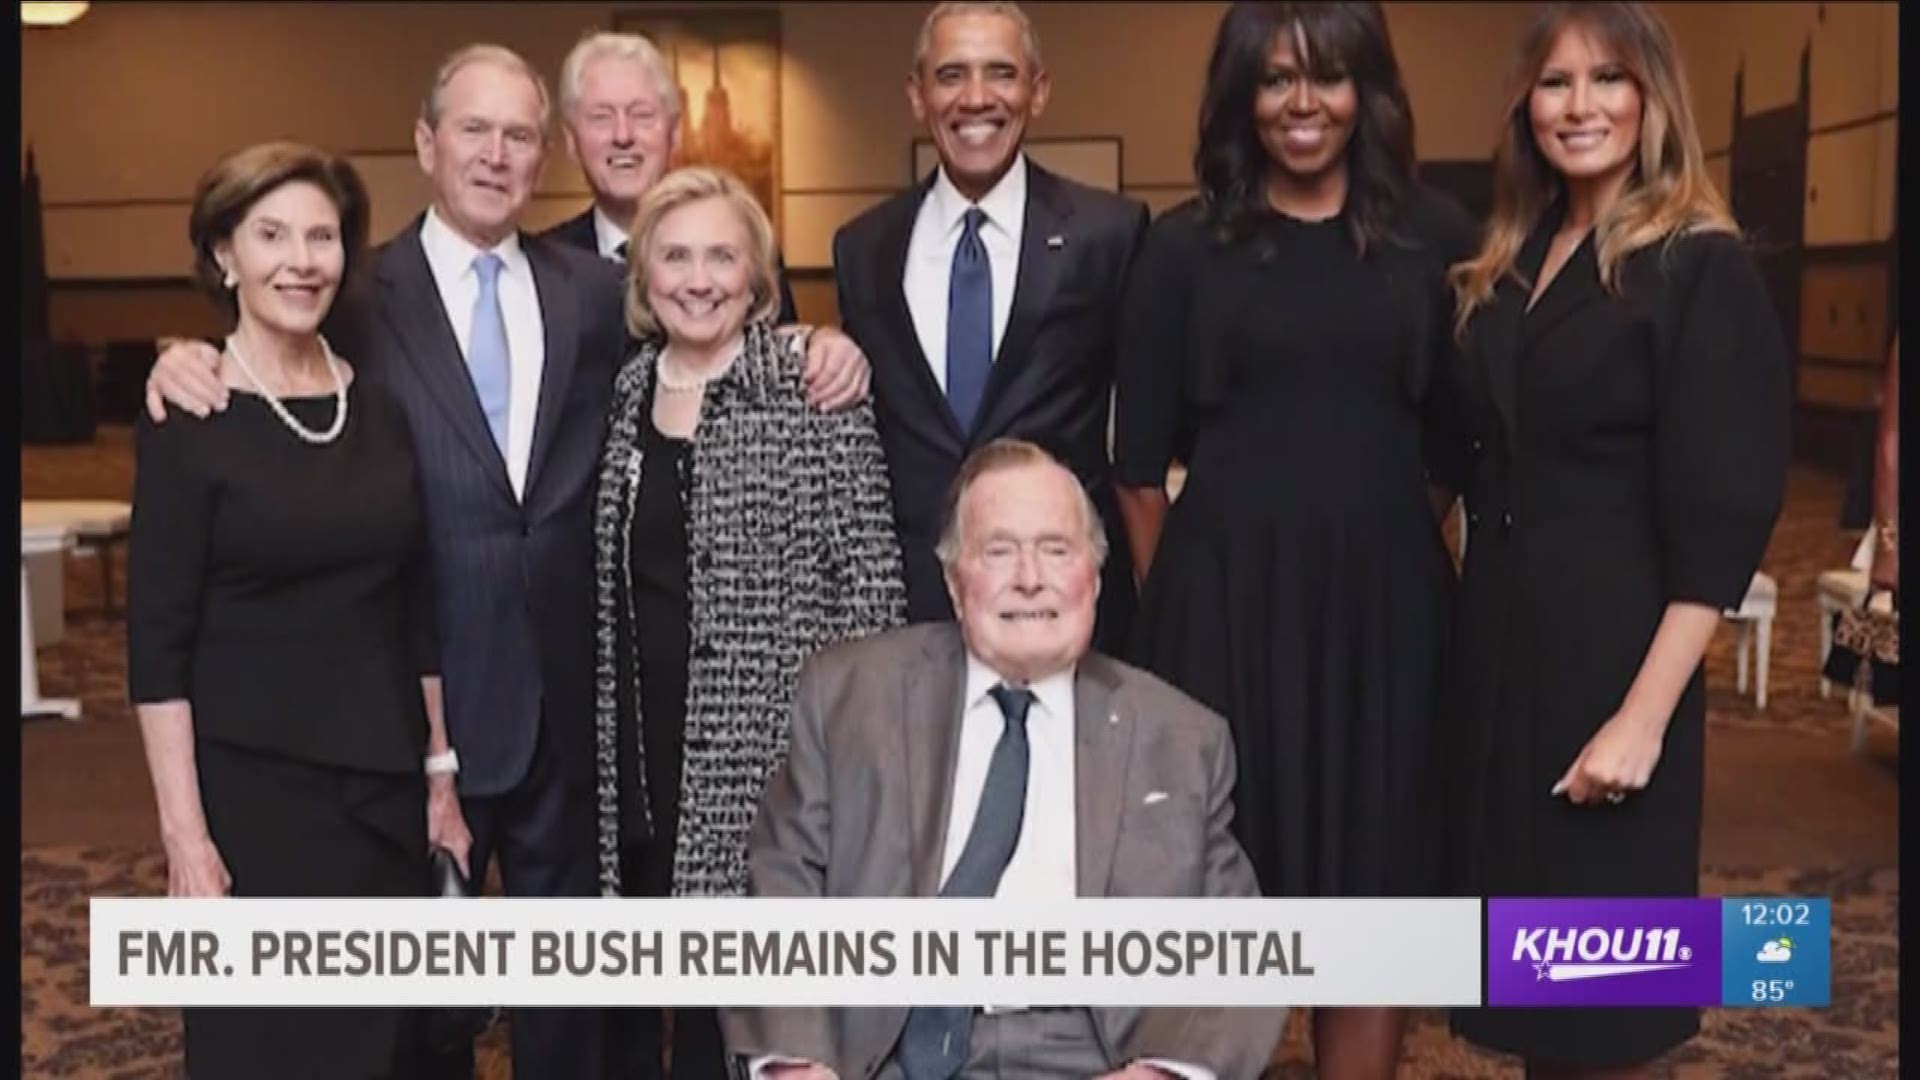 President George H.W. Bush will remain in Methodist Hospital today as he continues to regain strength. His doctors are very pleased with his progress.